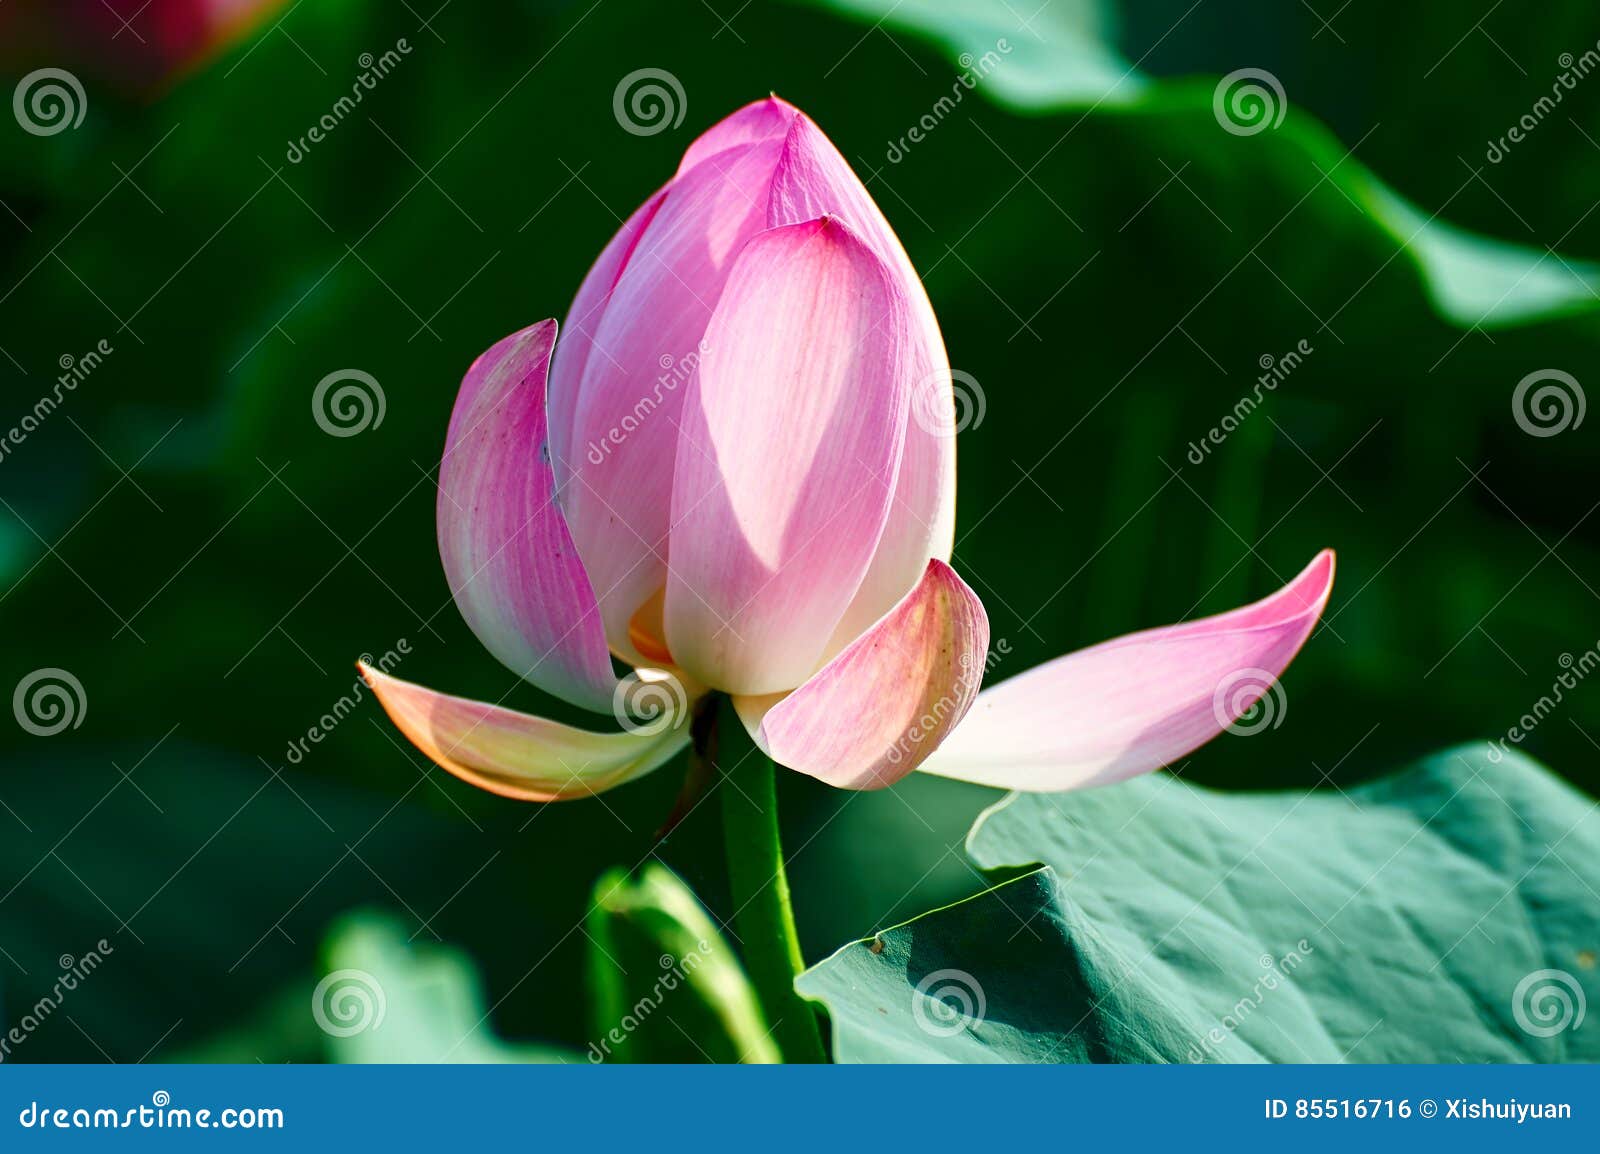 the lotus flower and leaf